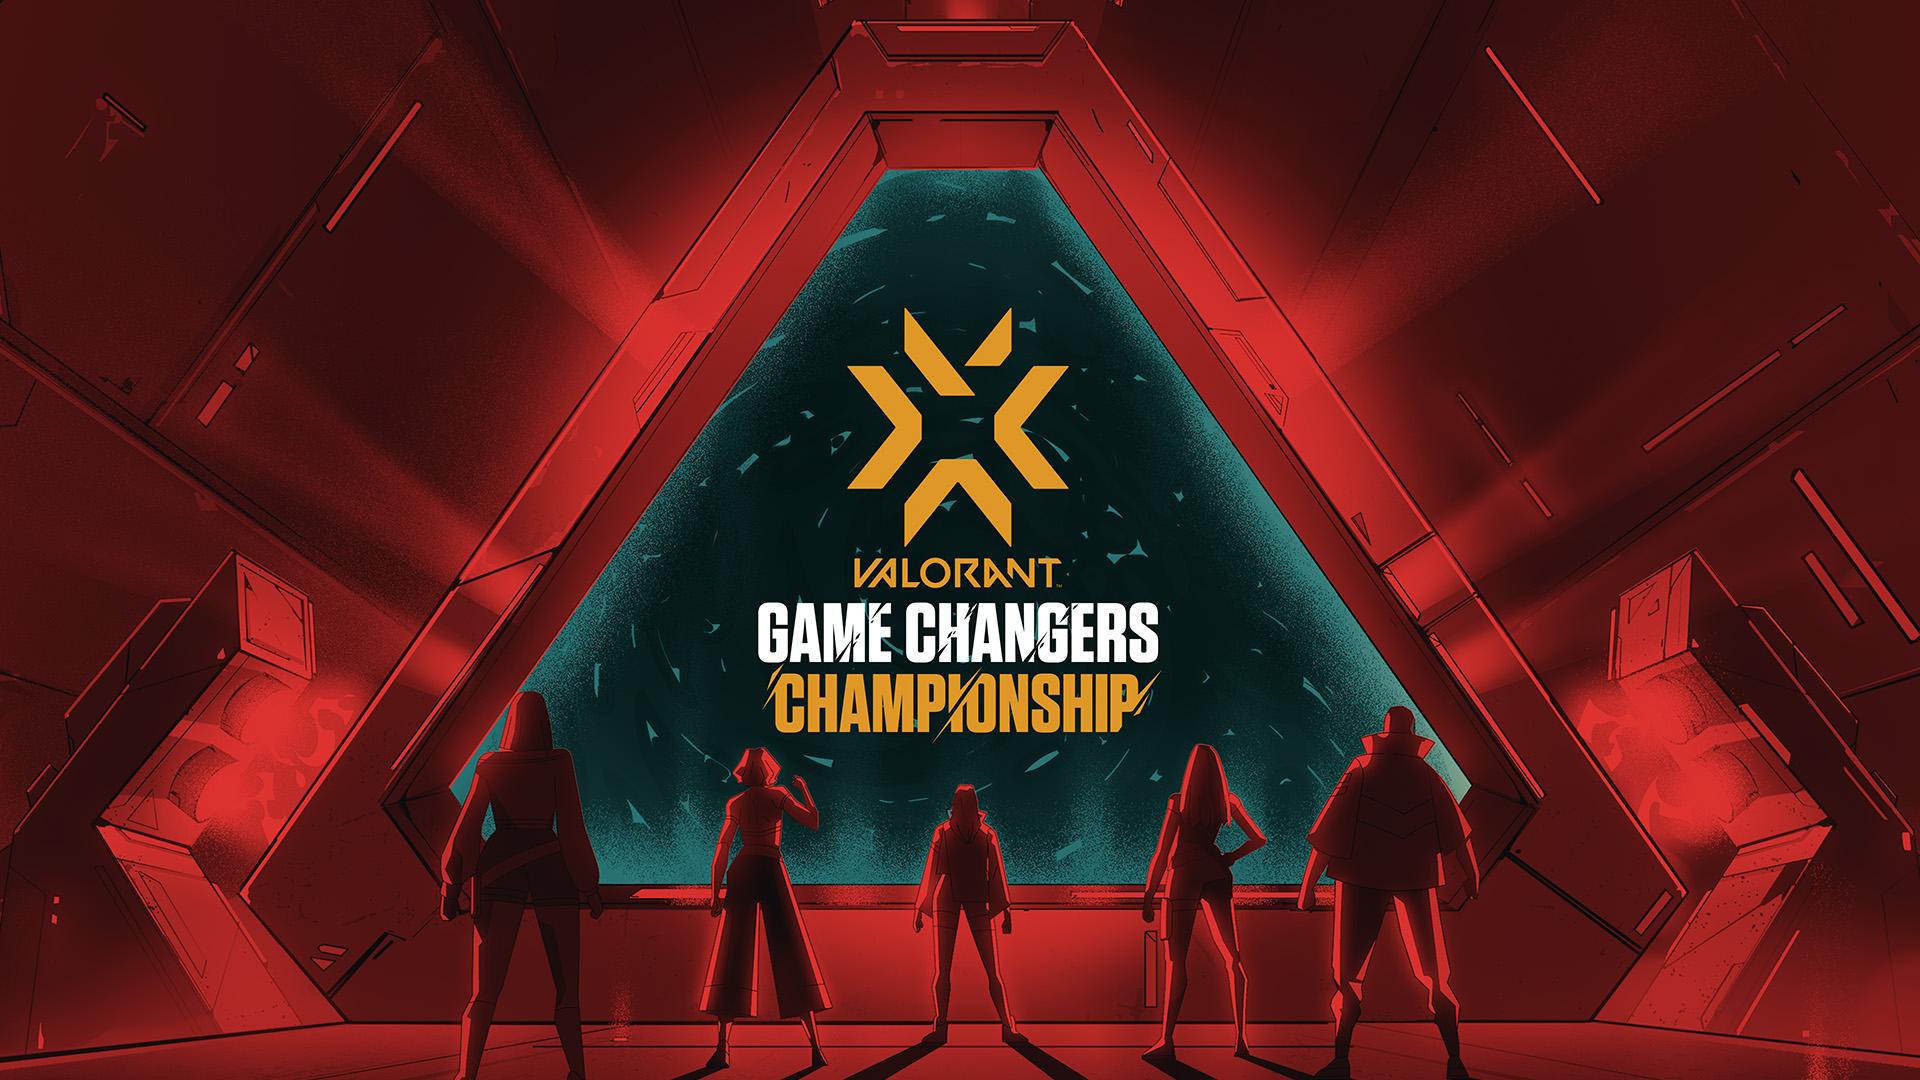 VALORANT Game Changers Championship feature image